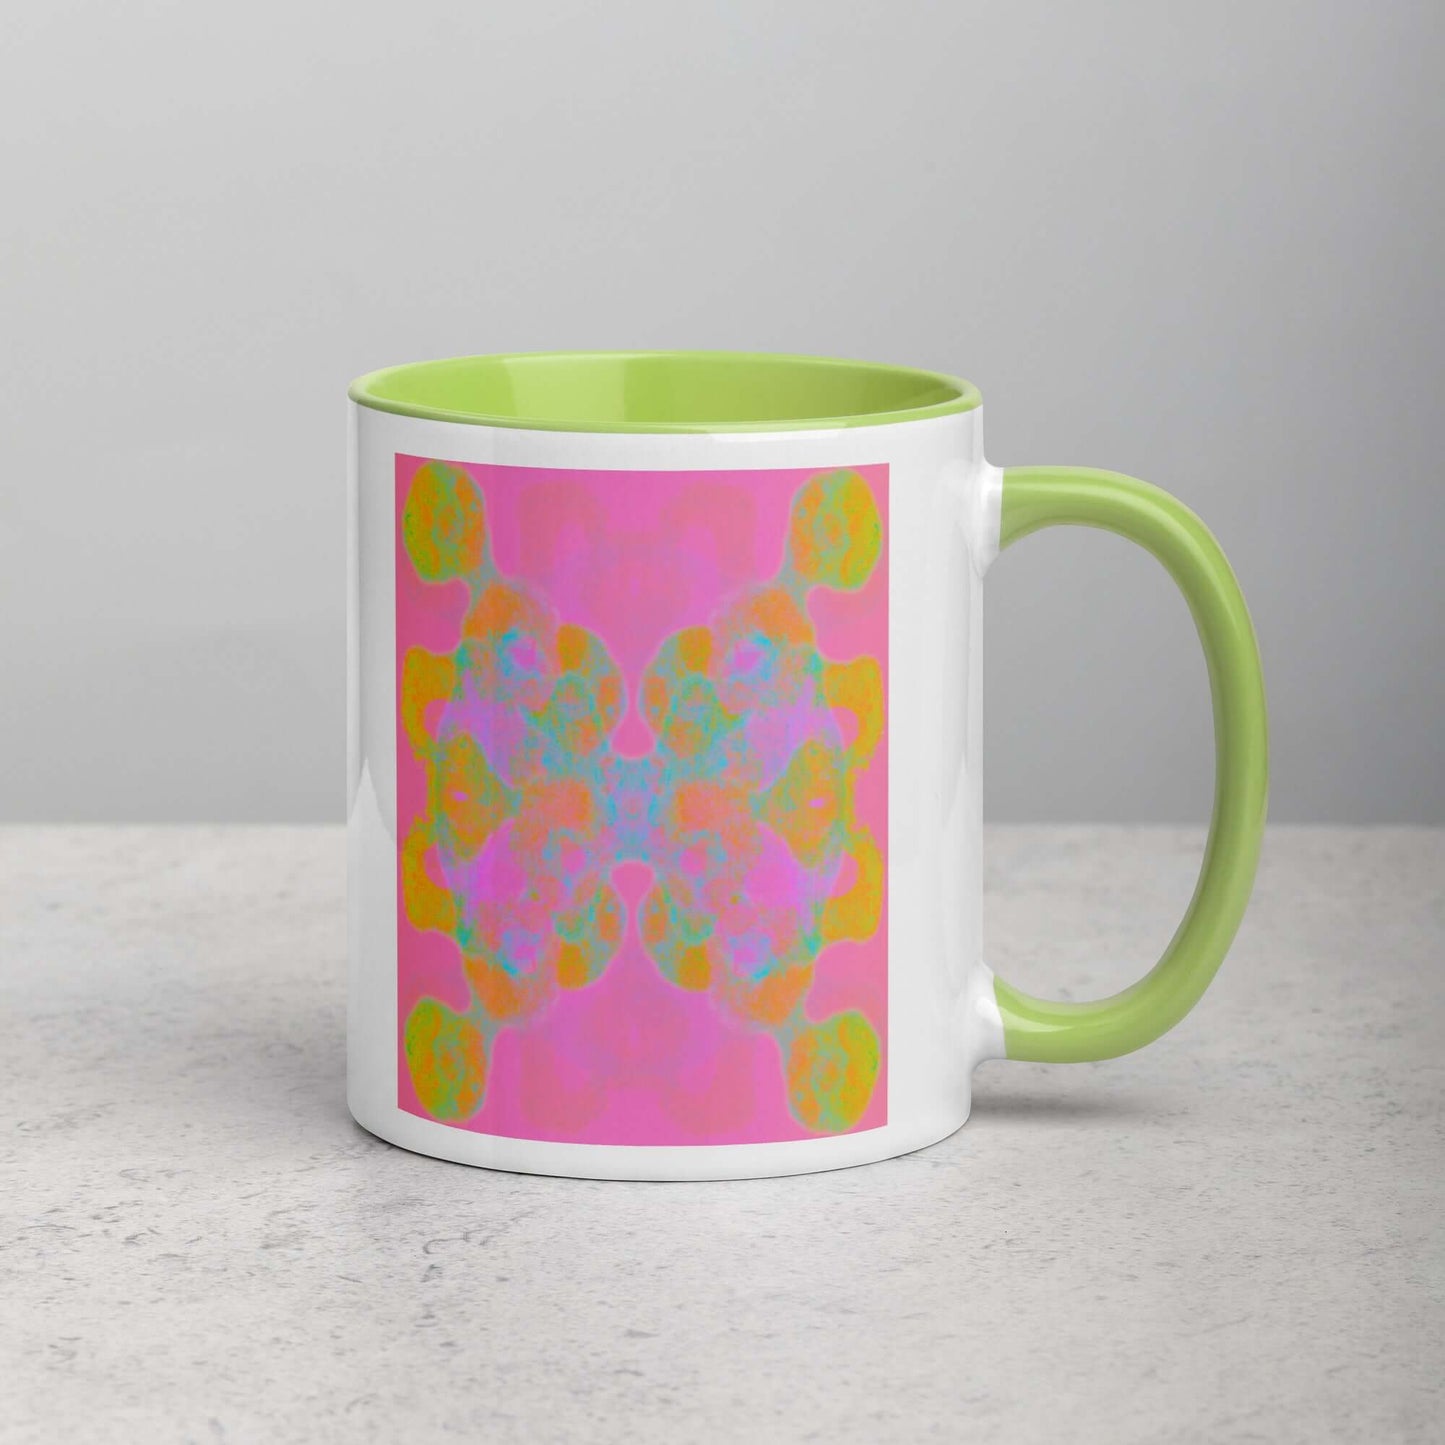 Colorful Abstract Butterfly Shape on Pink Background “Double the Fun” Abstract Art Mug with Lime Green Color Inside Right Handed Front View